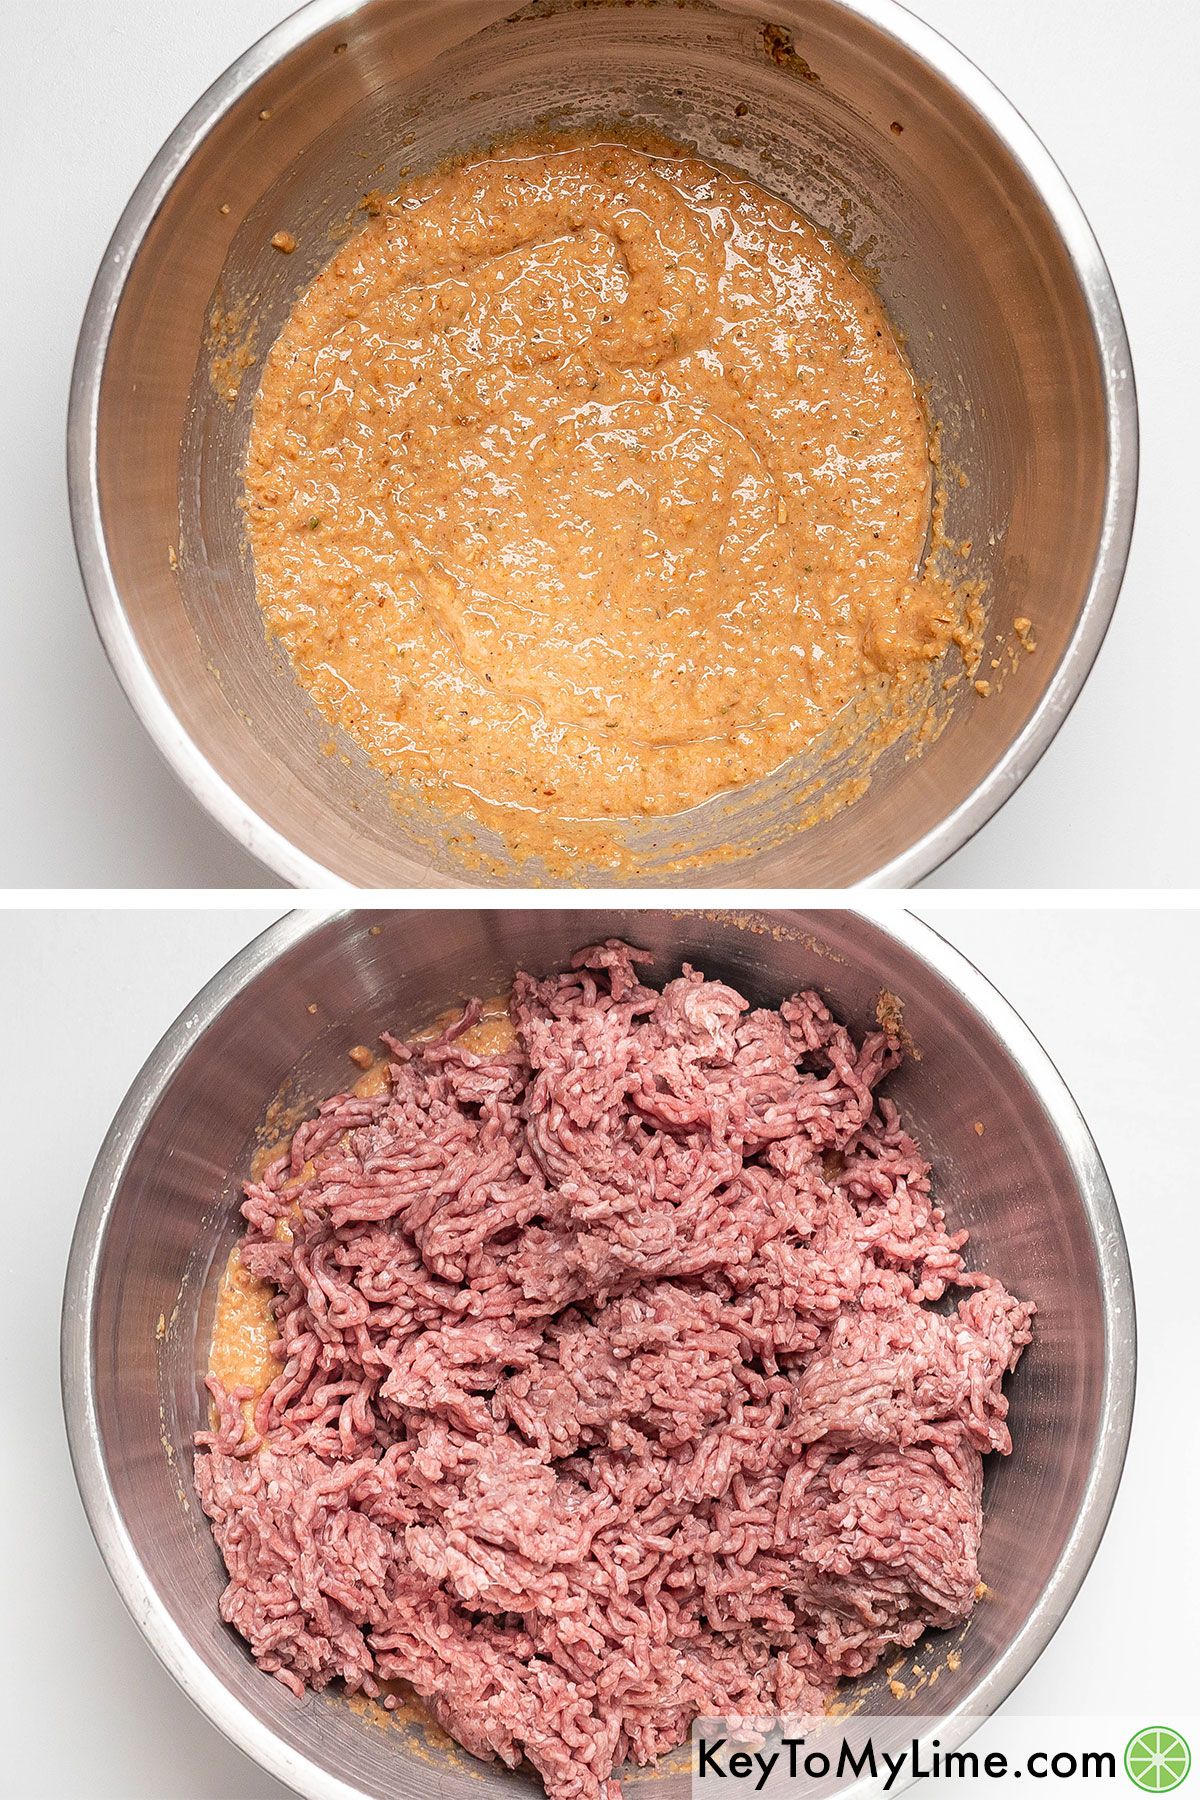 Mixing the ingredients together in a large mixing bowl, then adding chunks of ground beef to the mixture.